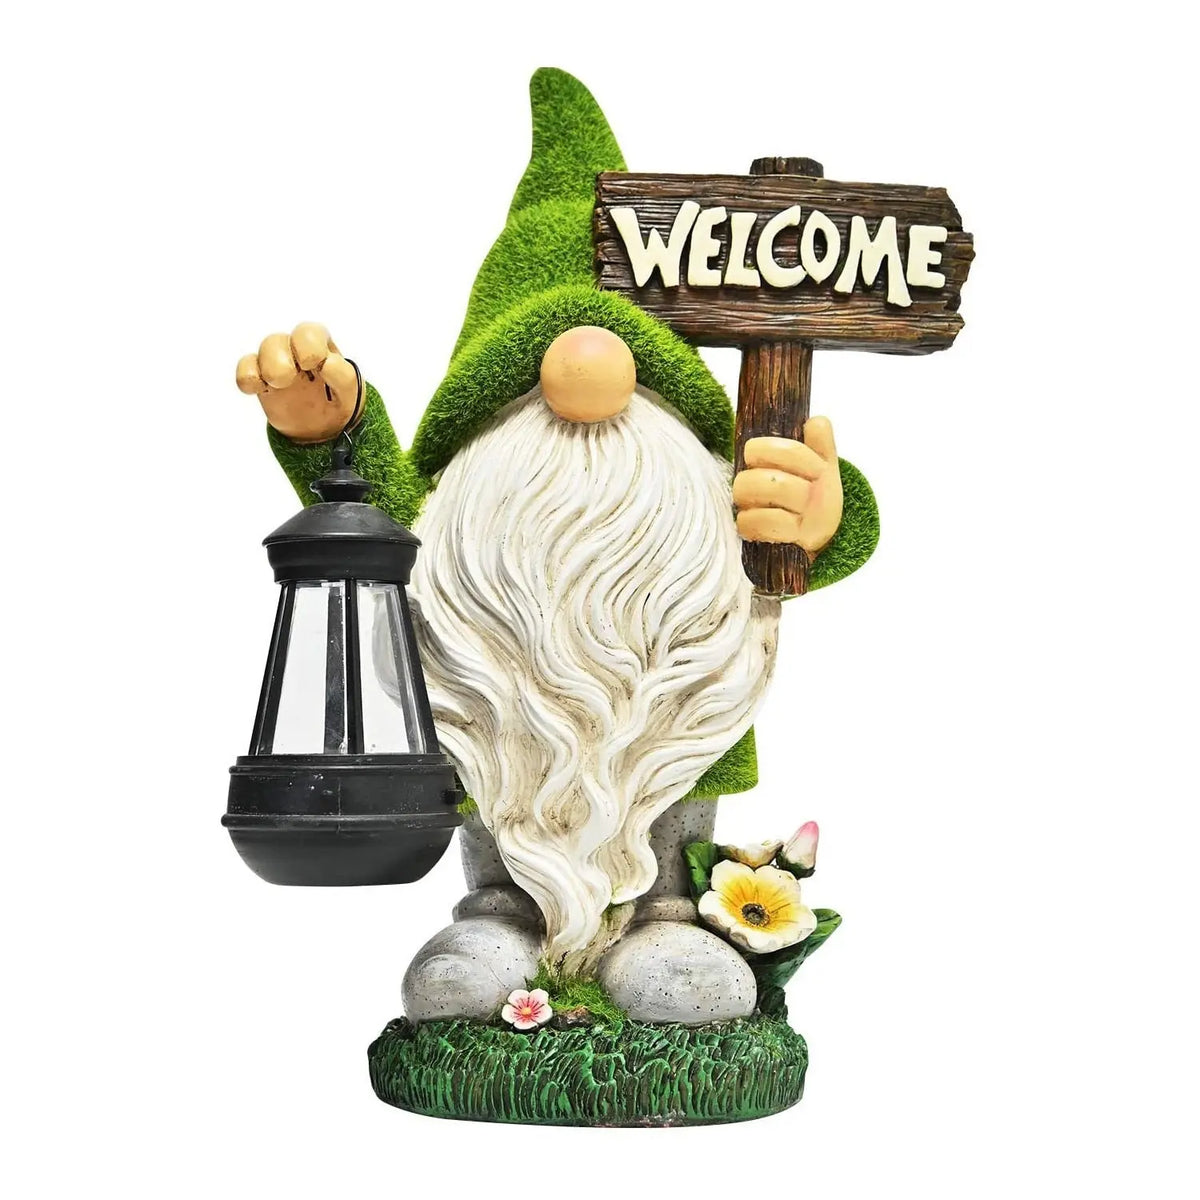 Outdoor Garden Dwarf Statue-resin Dwarf Statue Carrying Magic Ball Solar Led Light Welcome Sign Gnome Yard Lawn Large Figurine 3